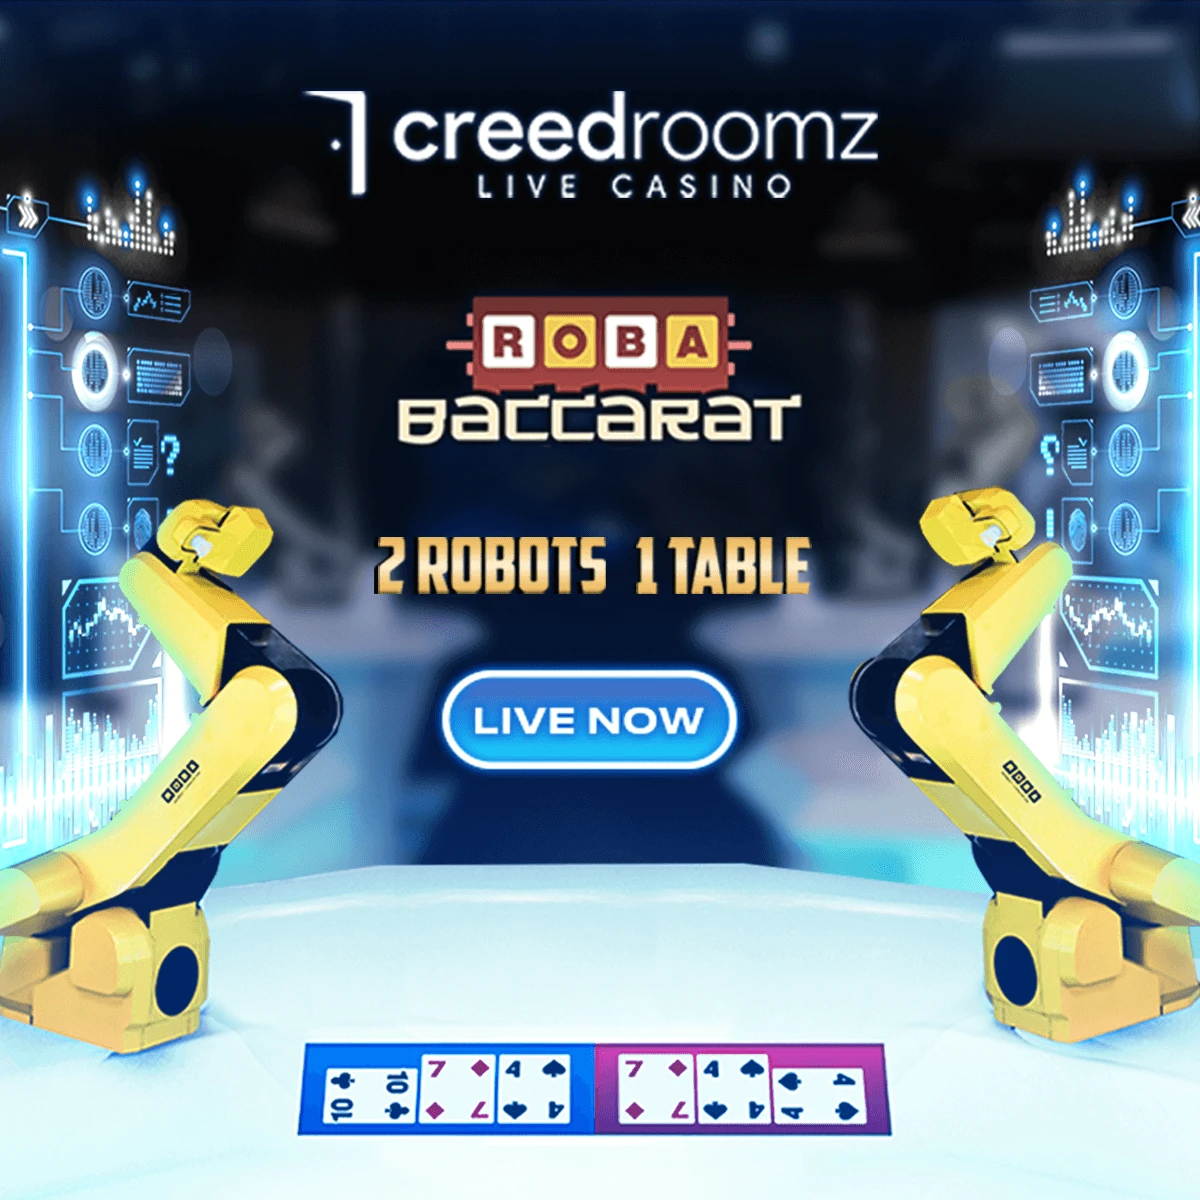 7269-two-hands-roba-baccarat-creedroomz-16795587589691.png